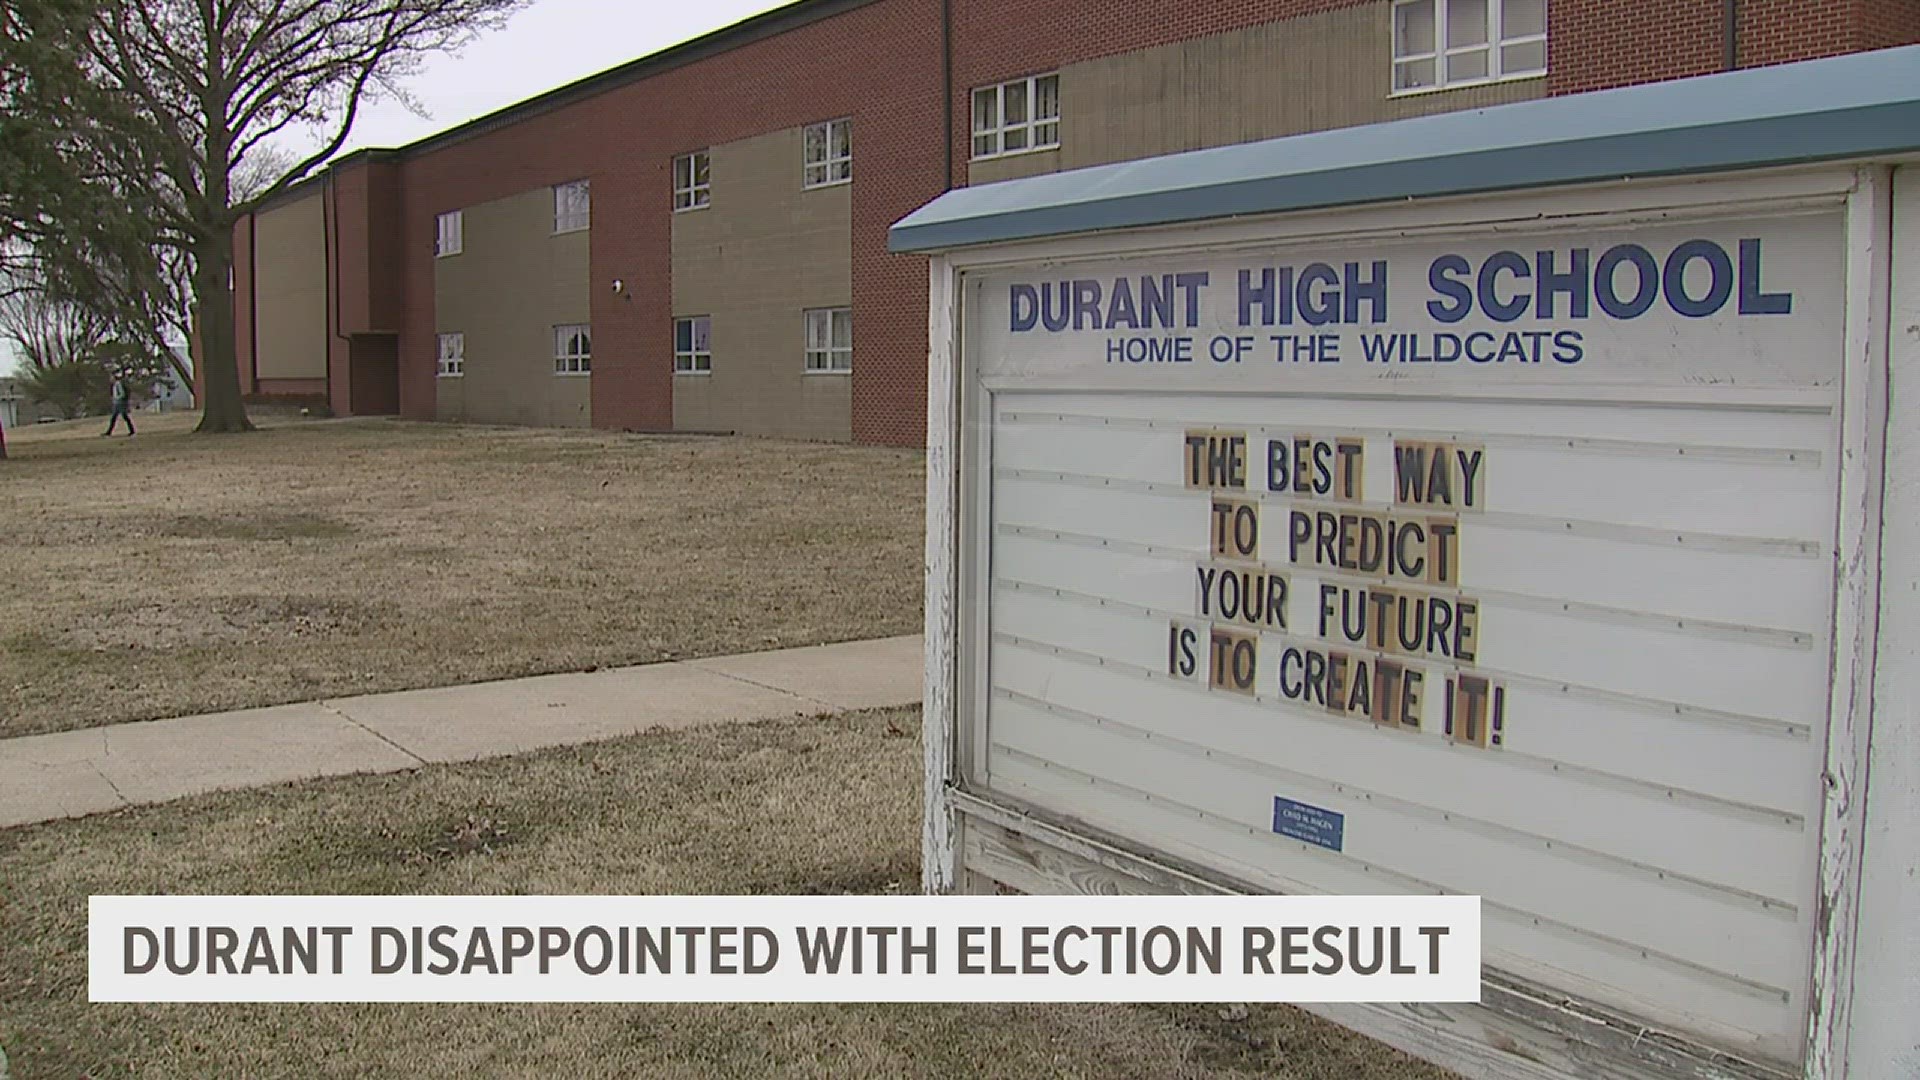 Just 12 votes shy of the 60% majority needed to pass, the proposal that could have led to renovations to Durant schools failed to pass, leaving many disappointed.